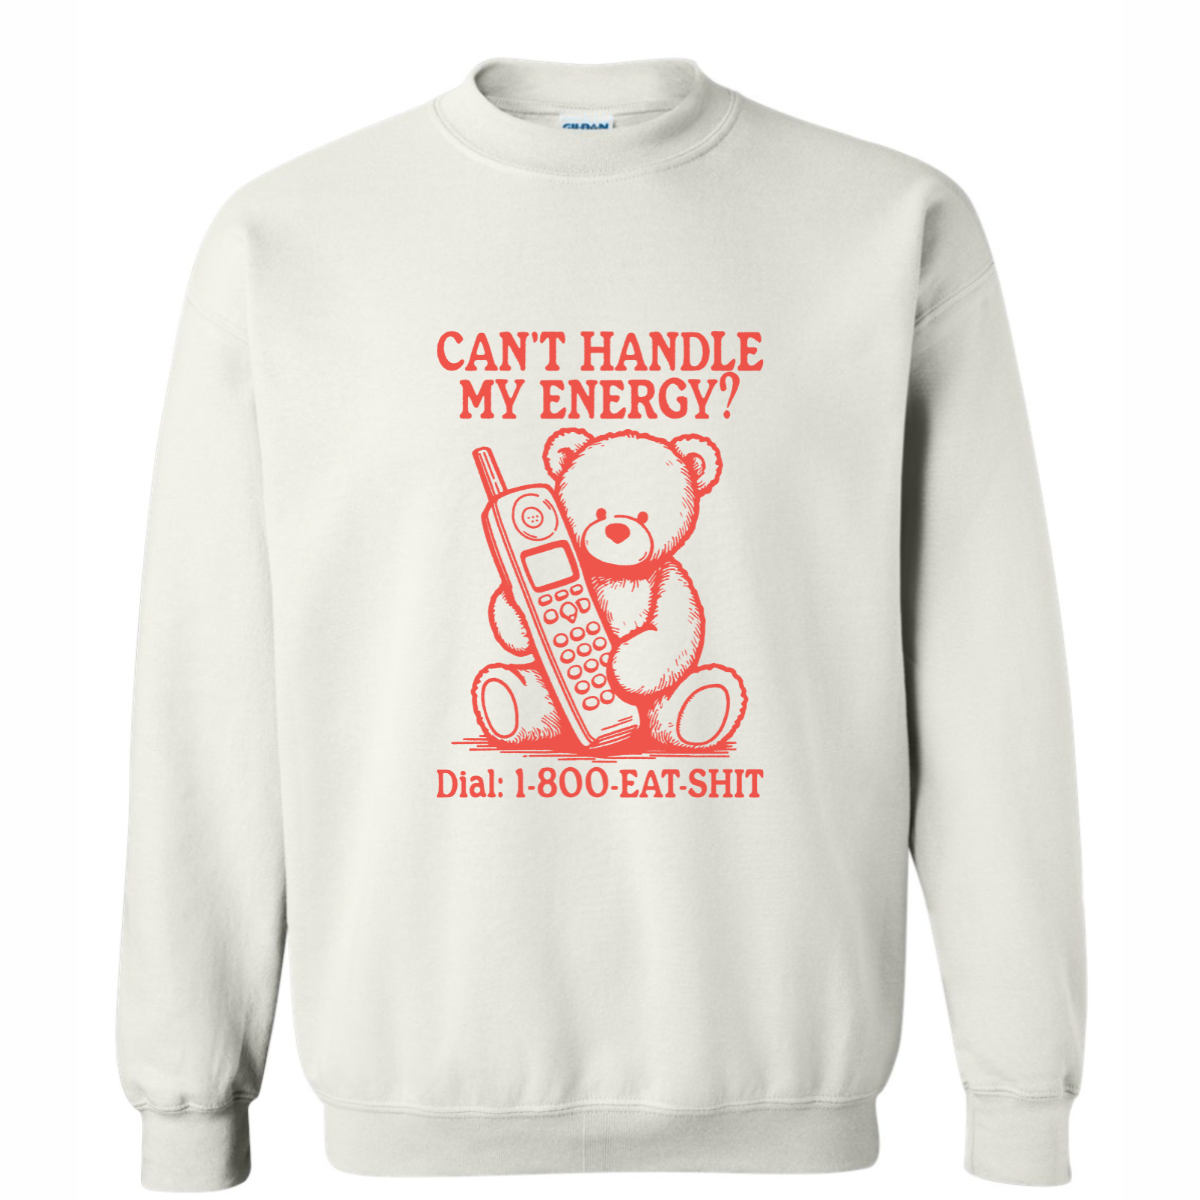 Can't Handle My Energy?